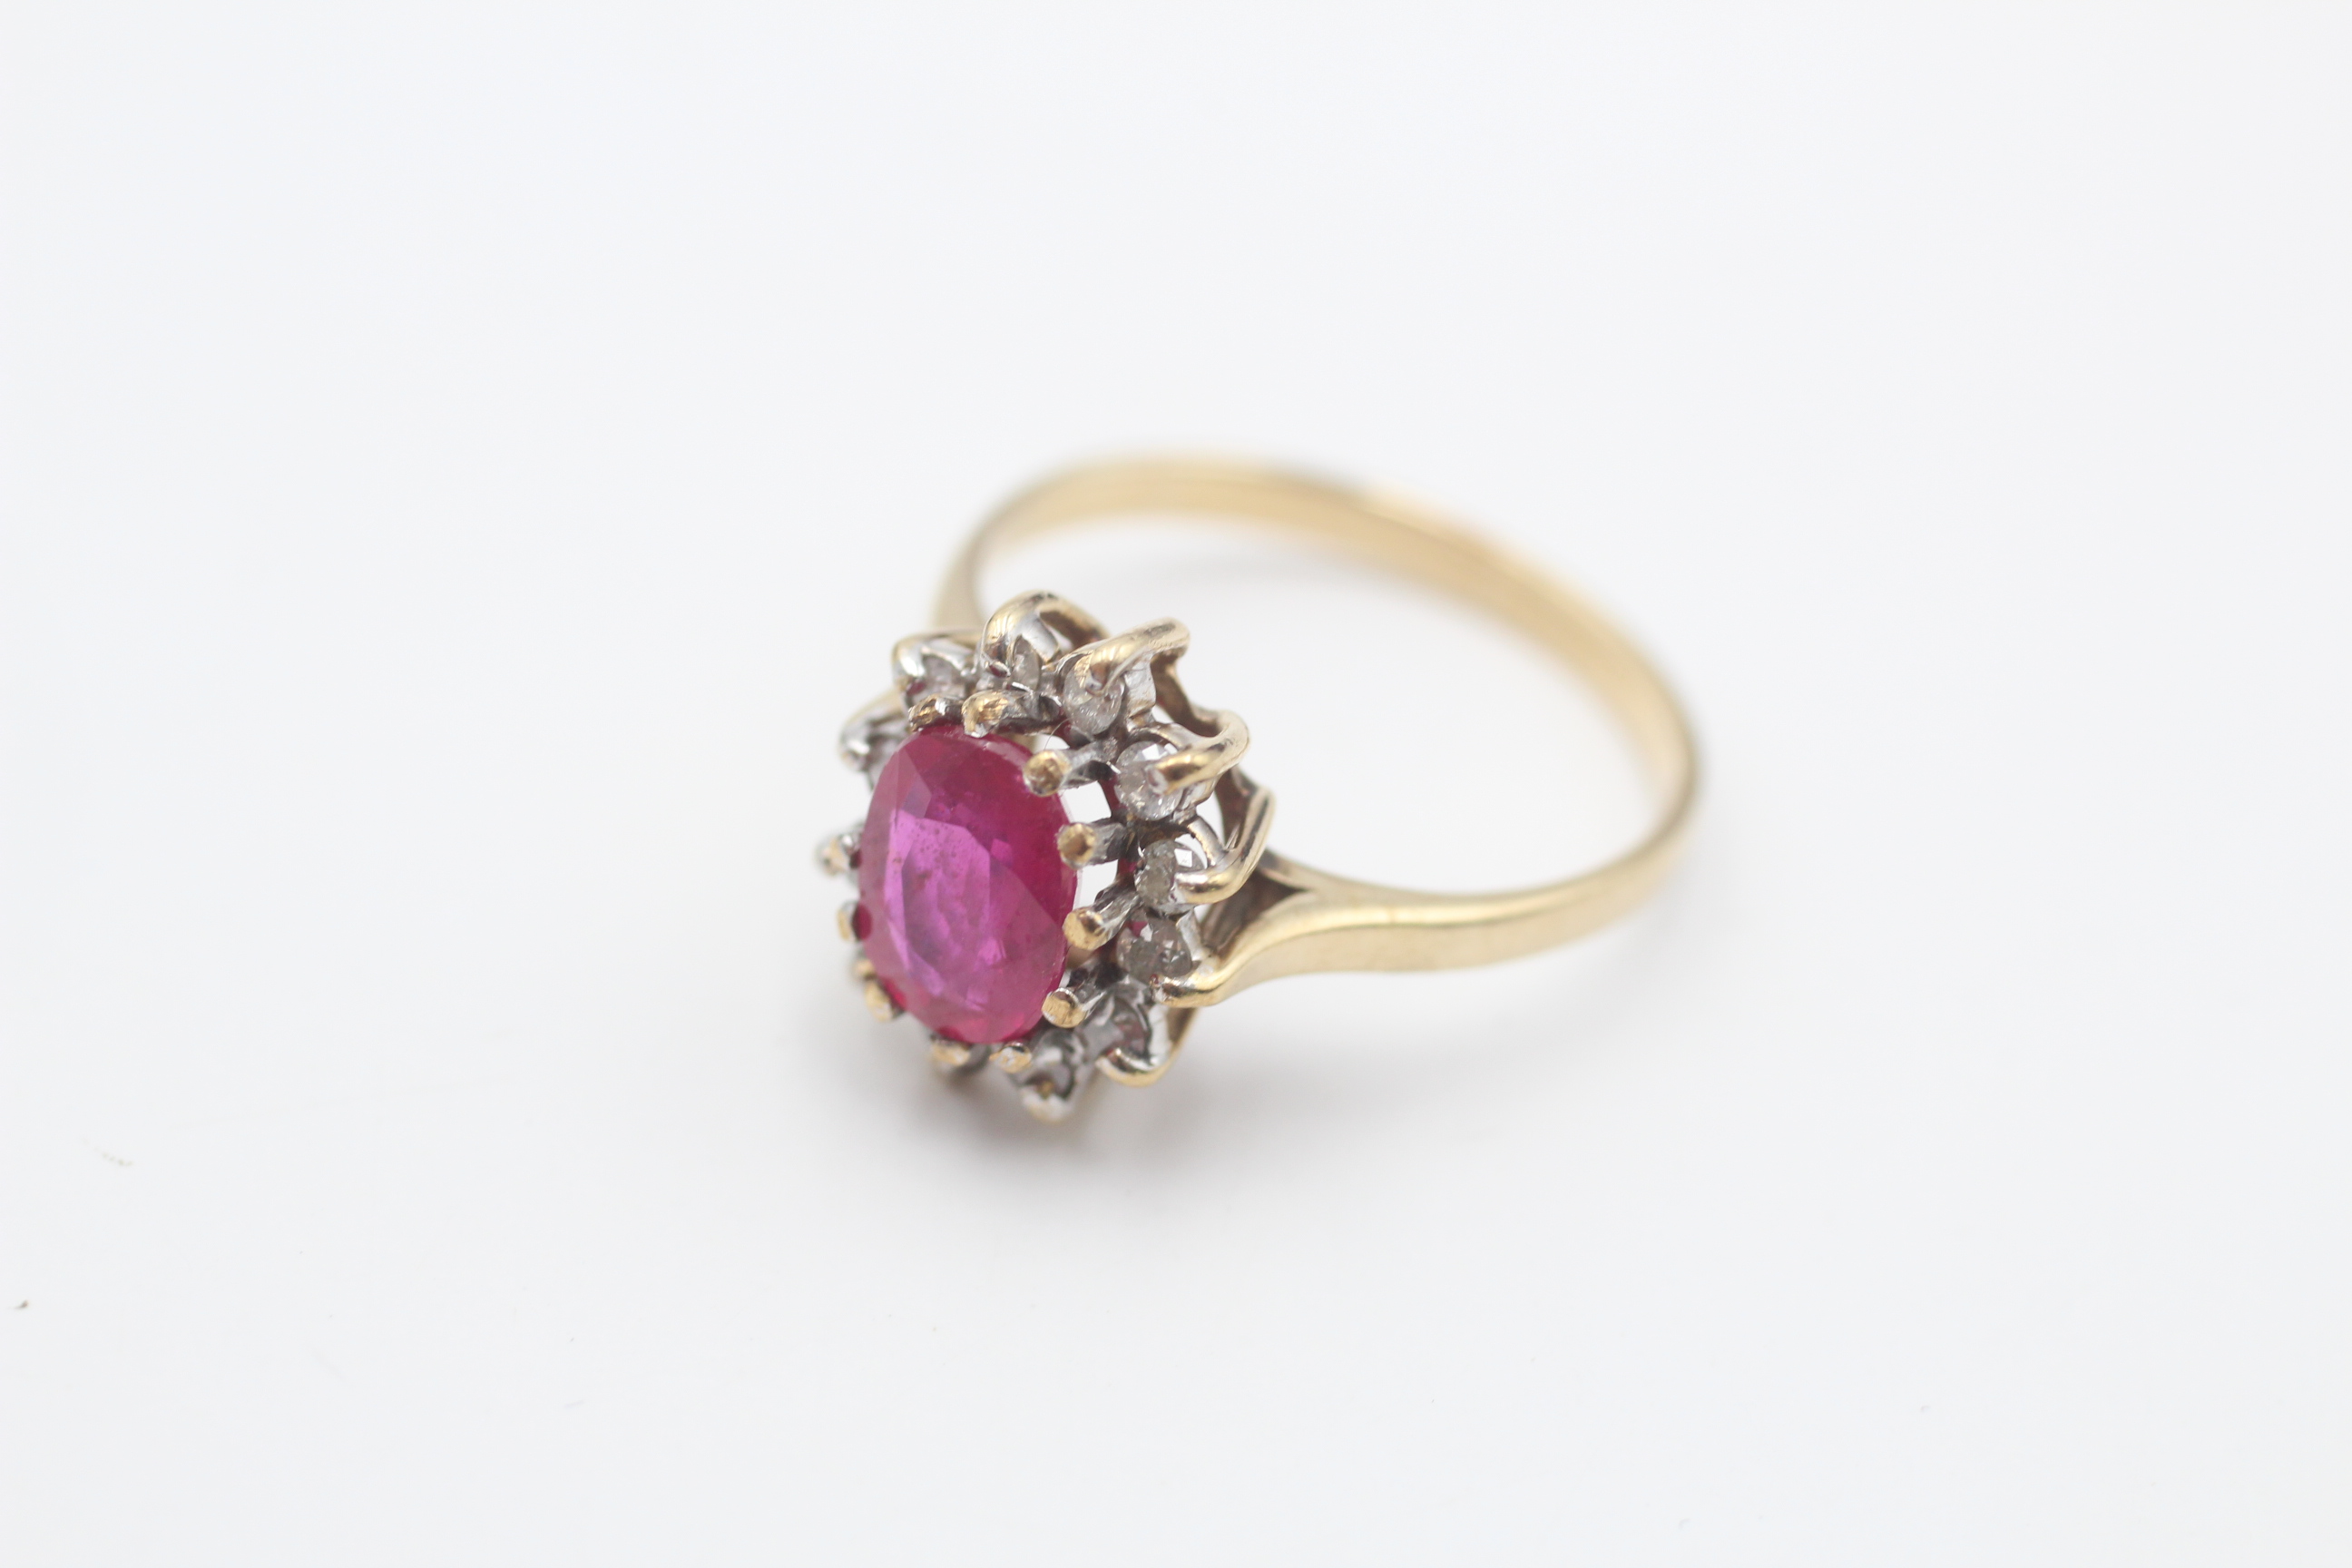 9ct gold vintage glass filled ruby & diamond halo dress ring (2.2g) - Image 2 of 5